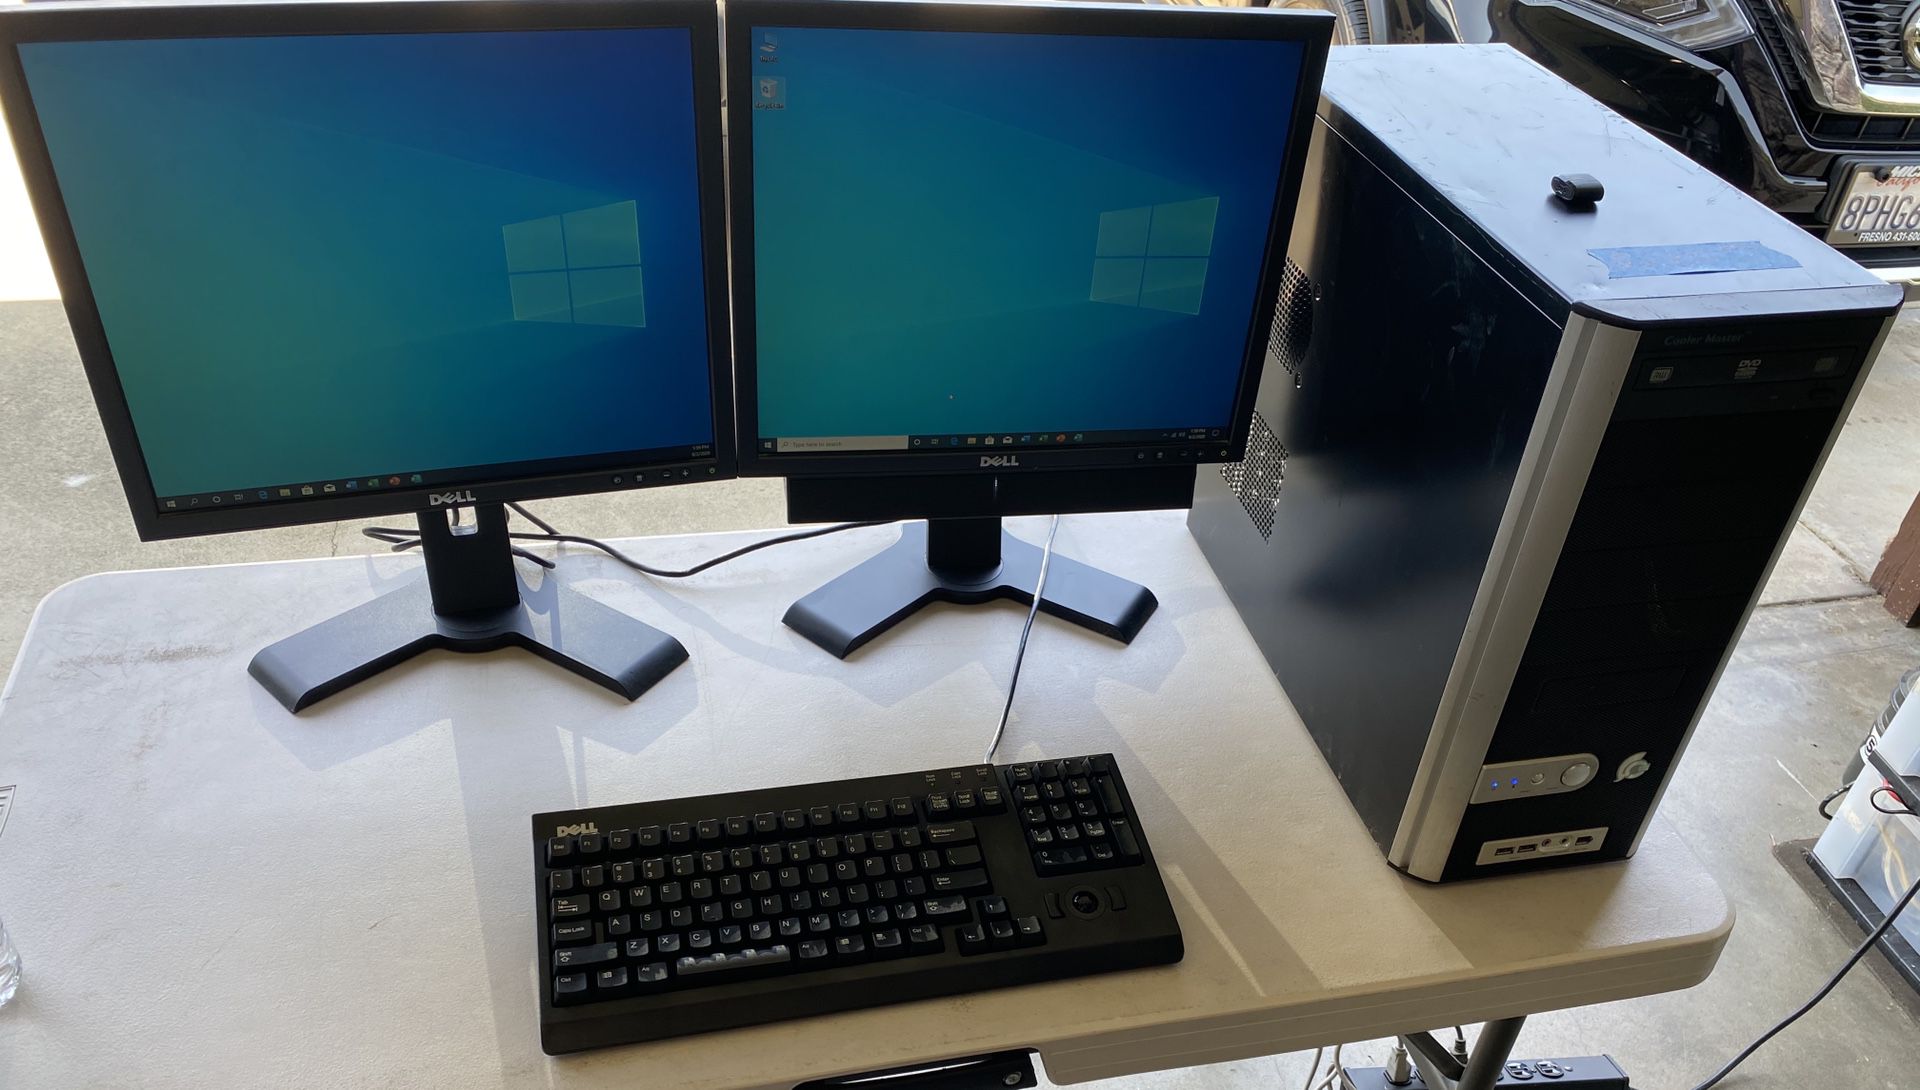 Gigabyte Core 2 Quad Computer System with Dual 19” Monitors